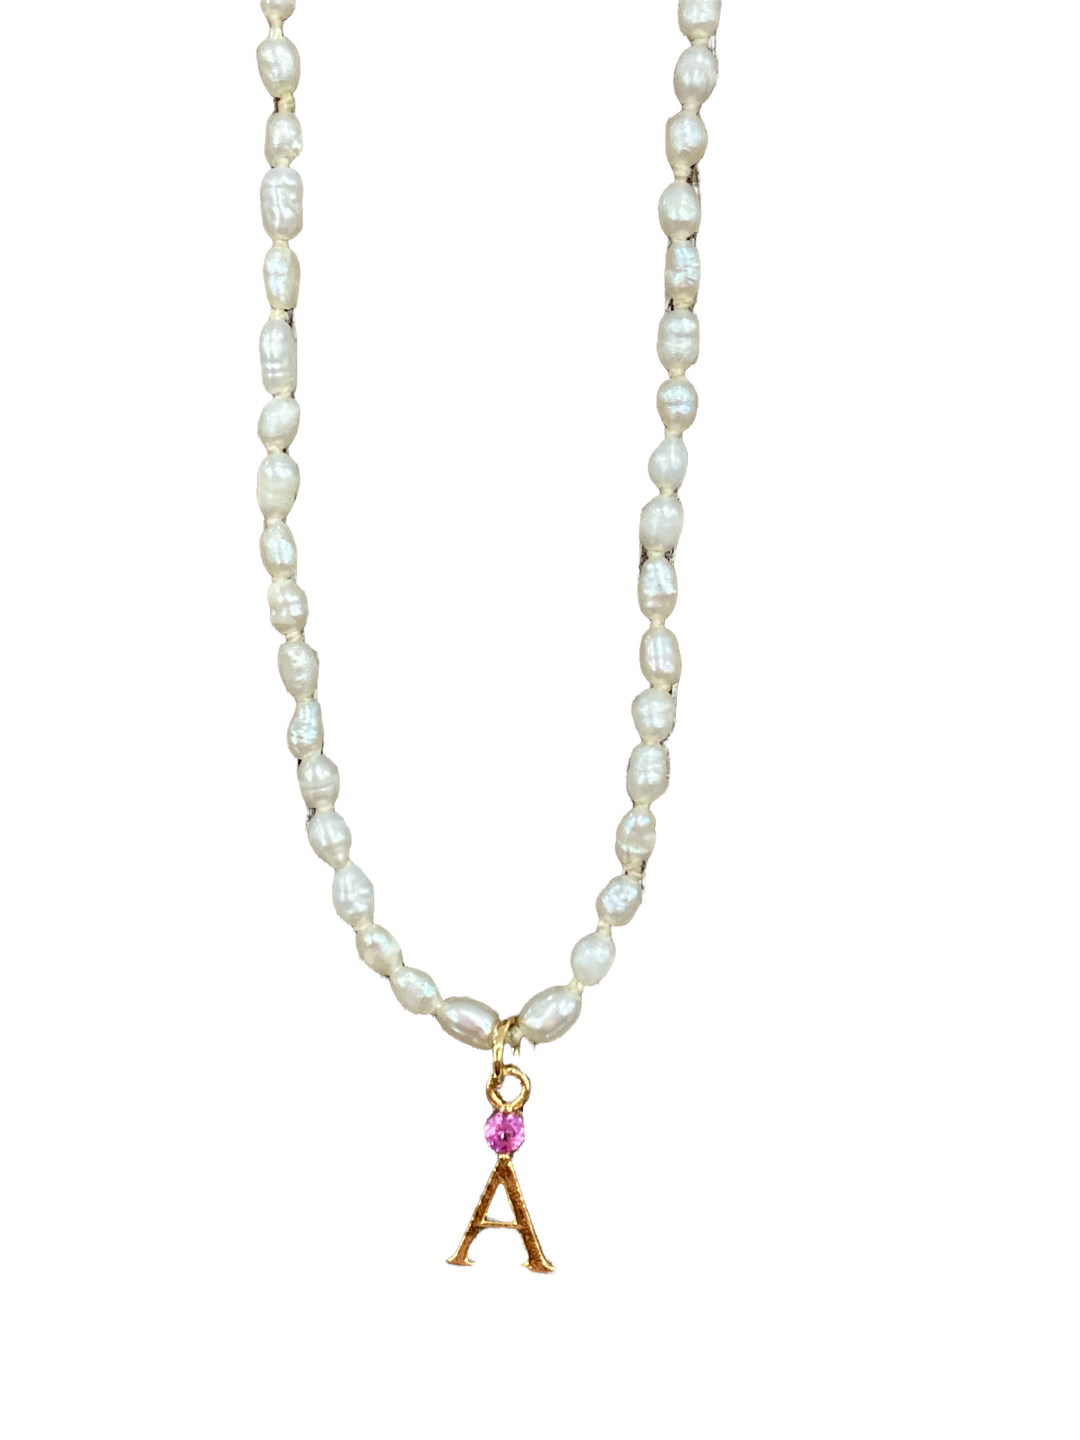 FRESH WATER PEARL BEAD INITIAL CHARM NECKLACE - Kingfisher Road - Online Boutique